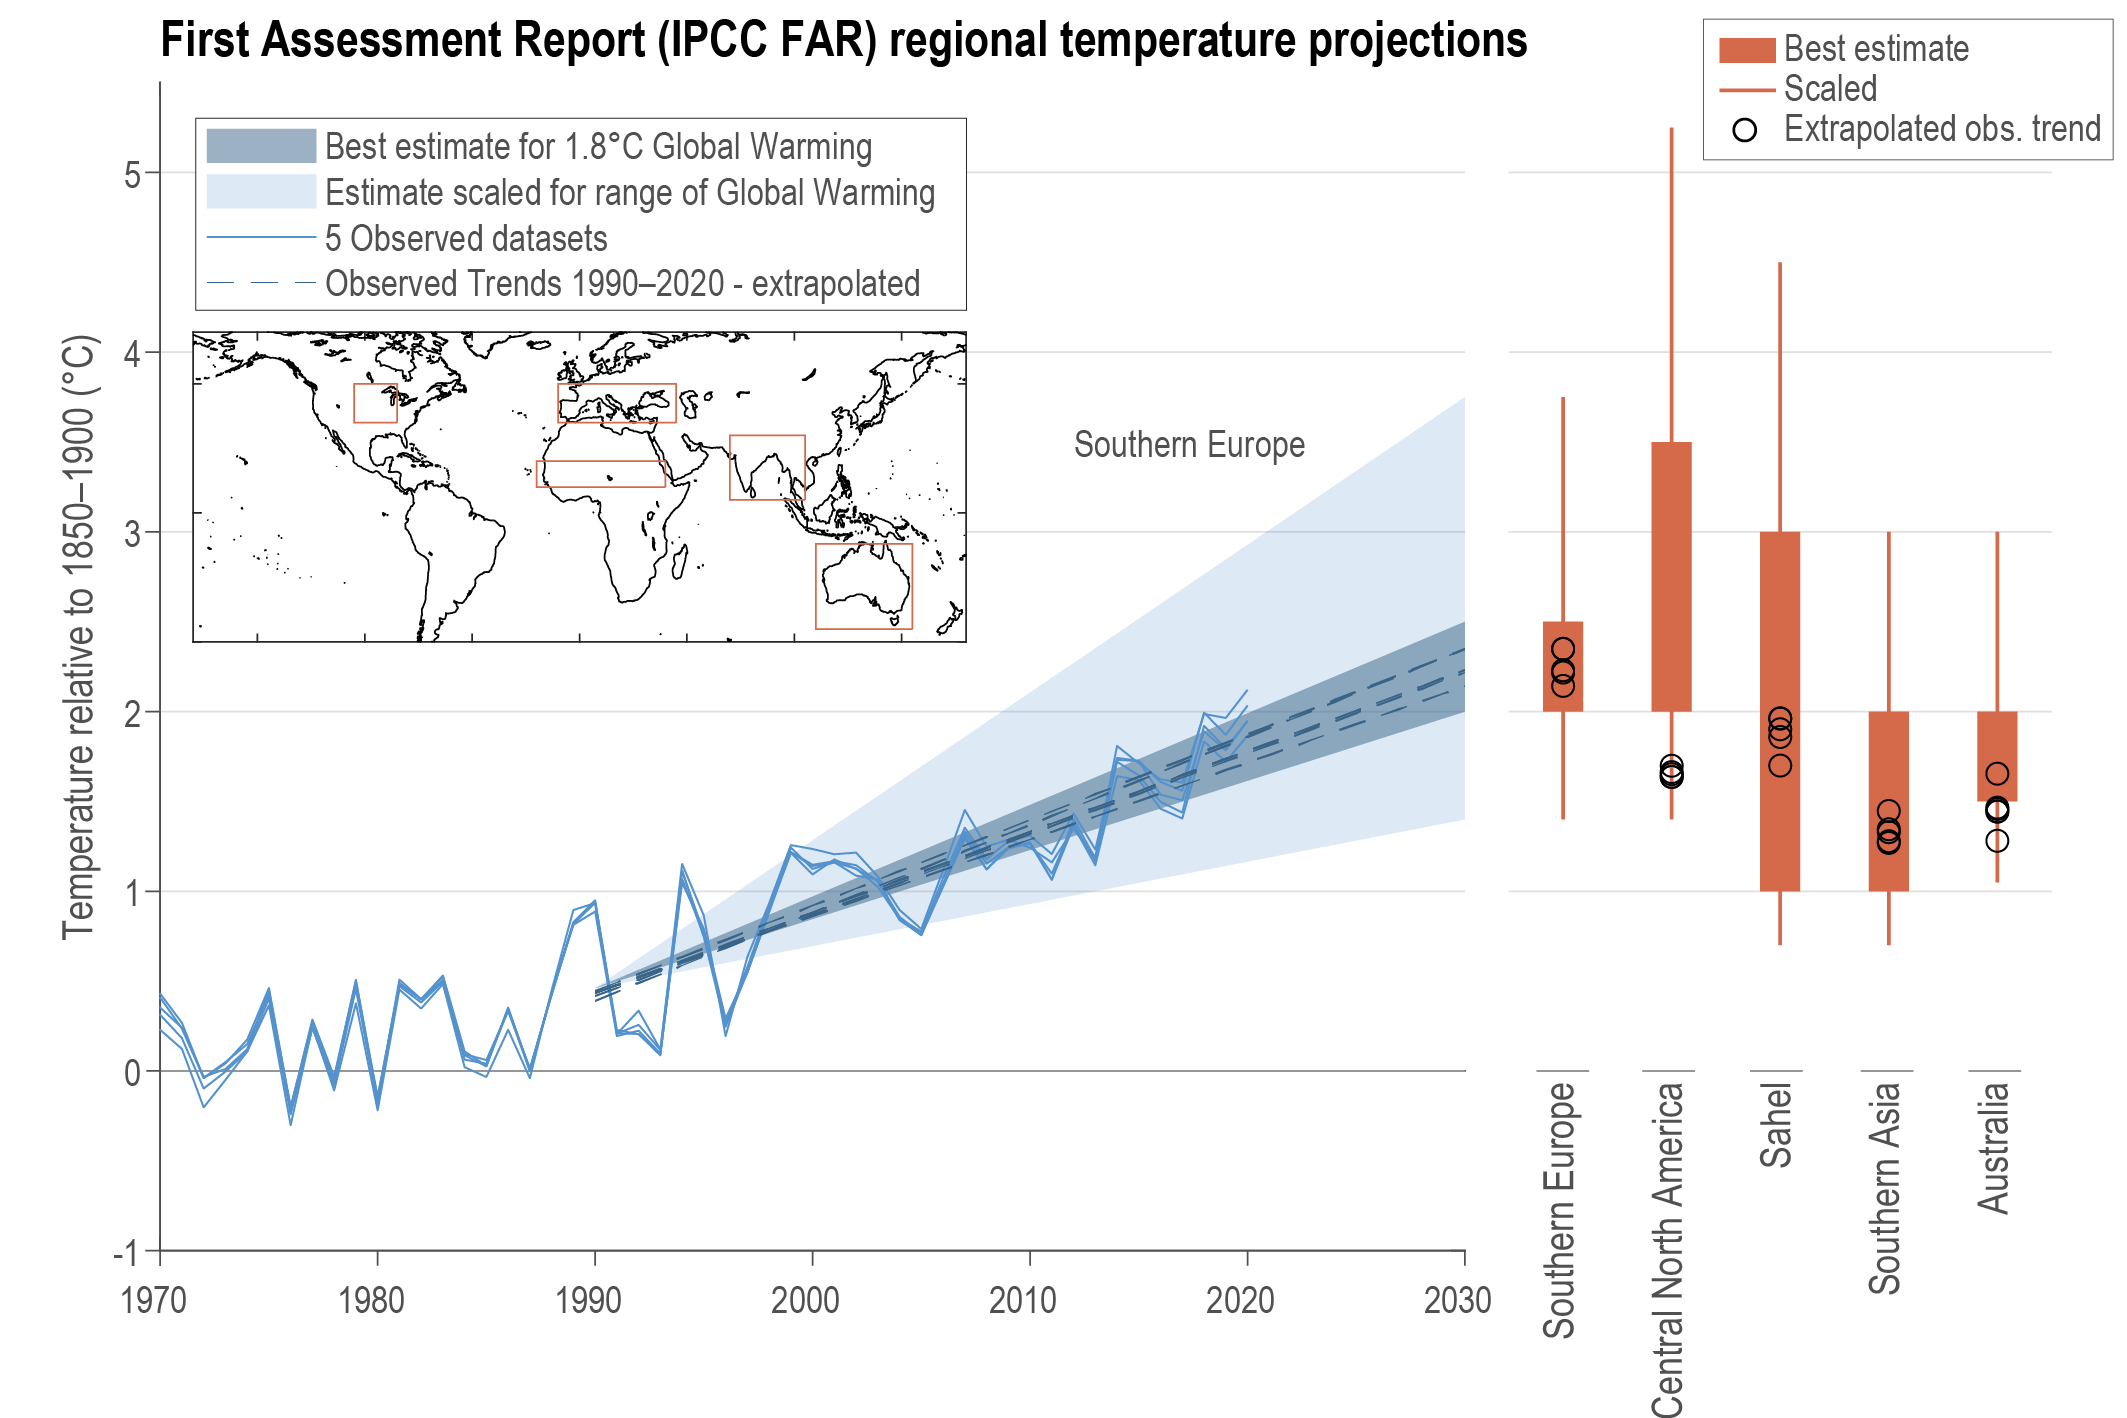 Figure 1.10 | Range of projected temperature change for 1990–2030 for various regions defined in IPCC First Assessment Report (FAR).